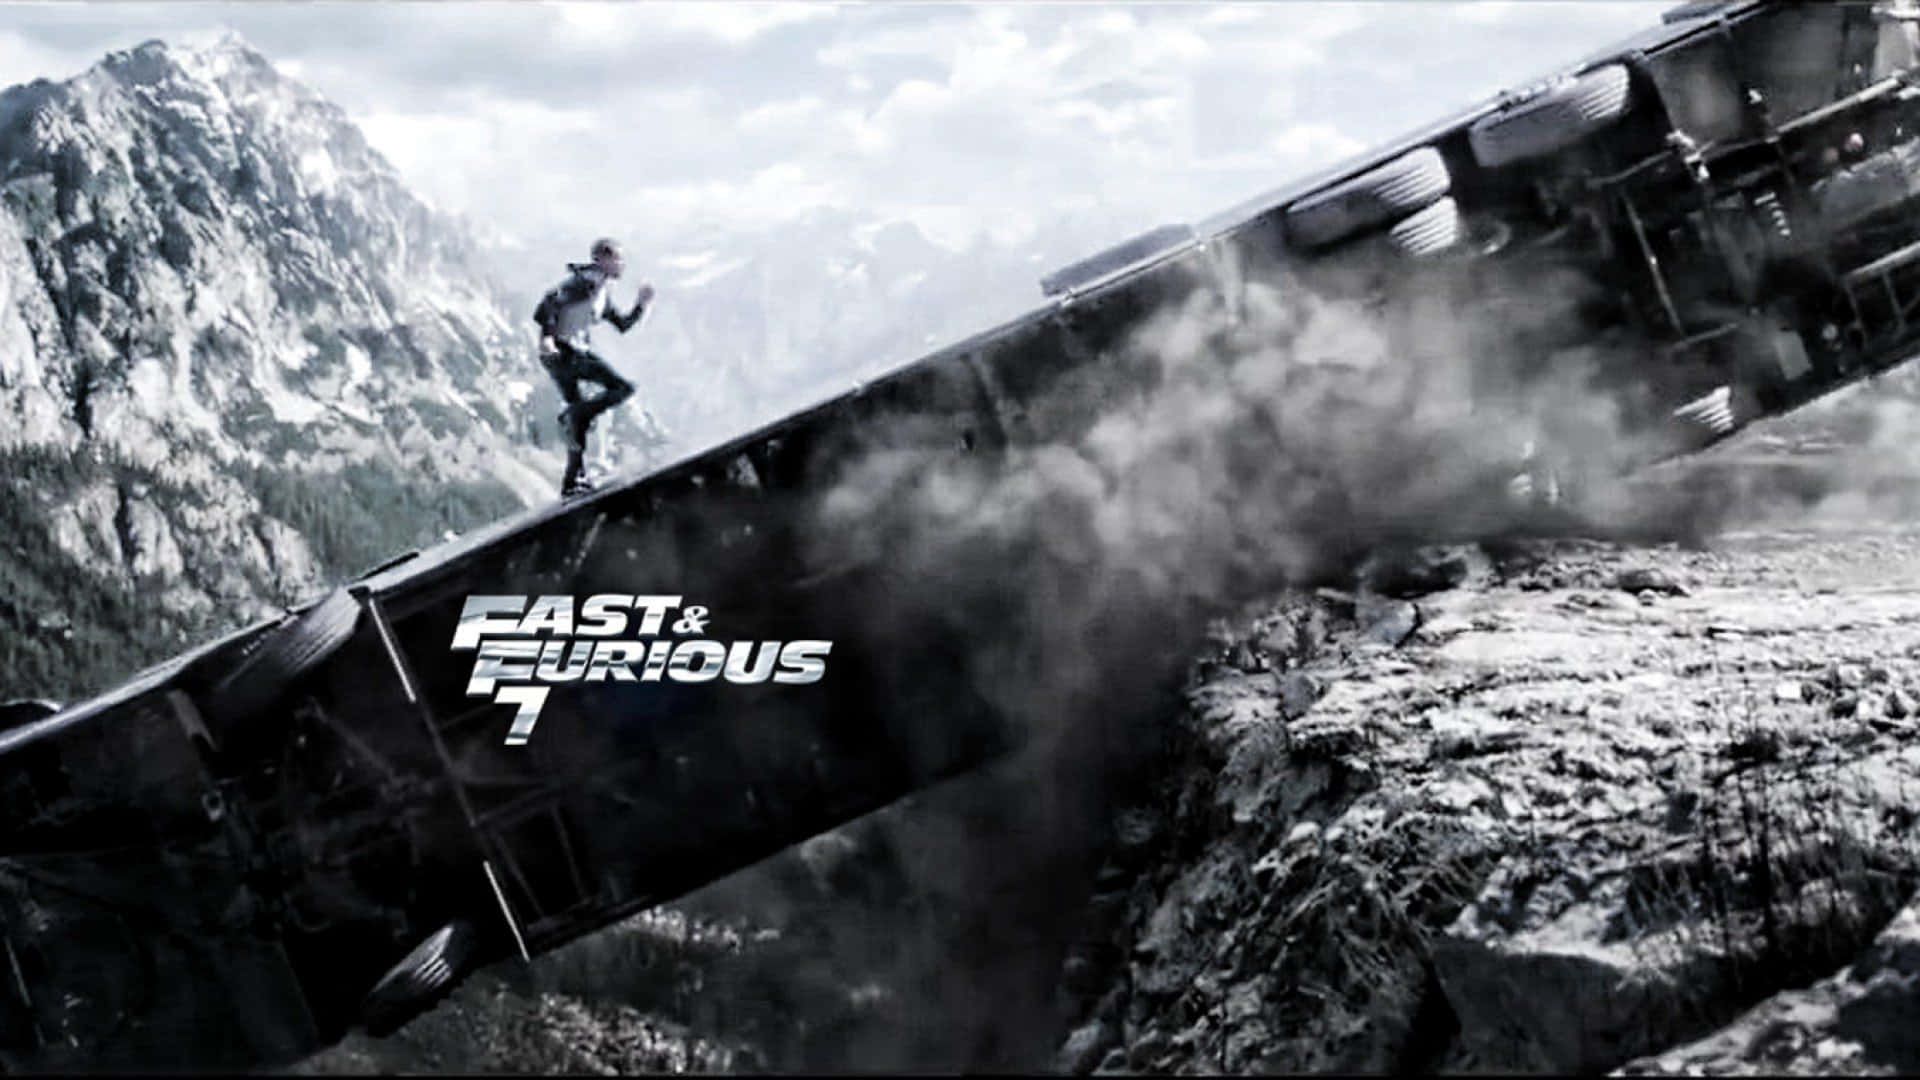 "Bringing Fast and Furious to Life"